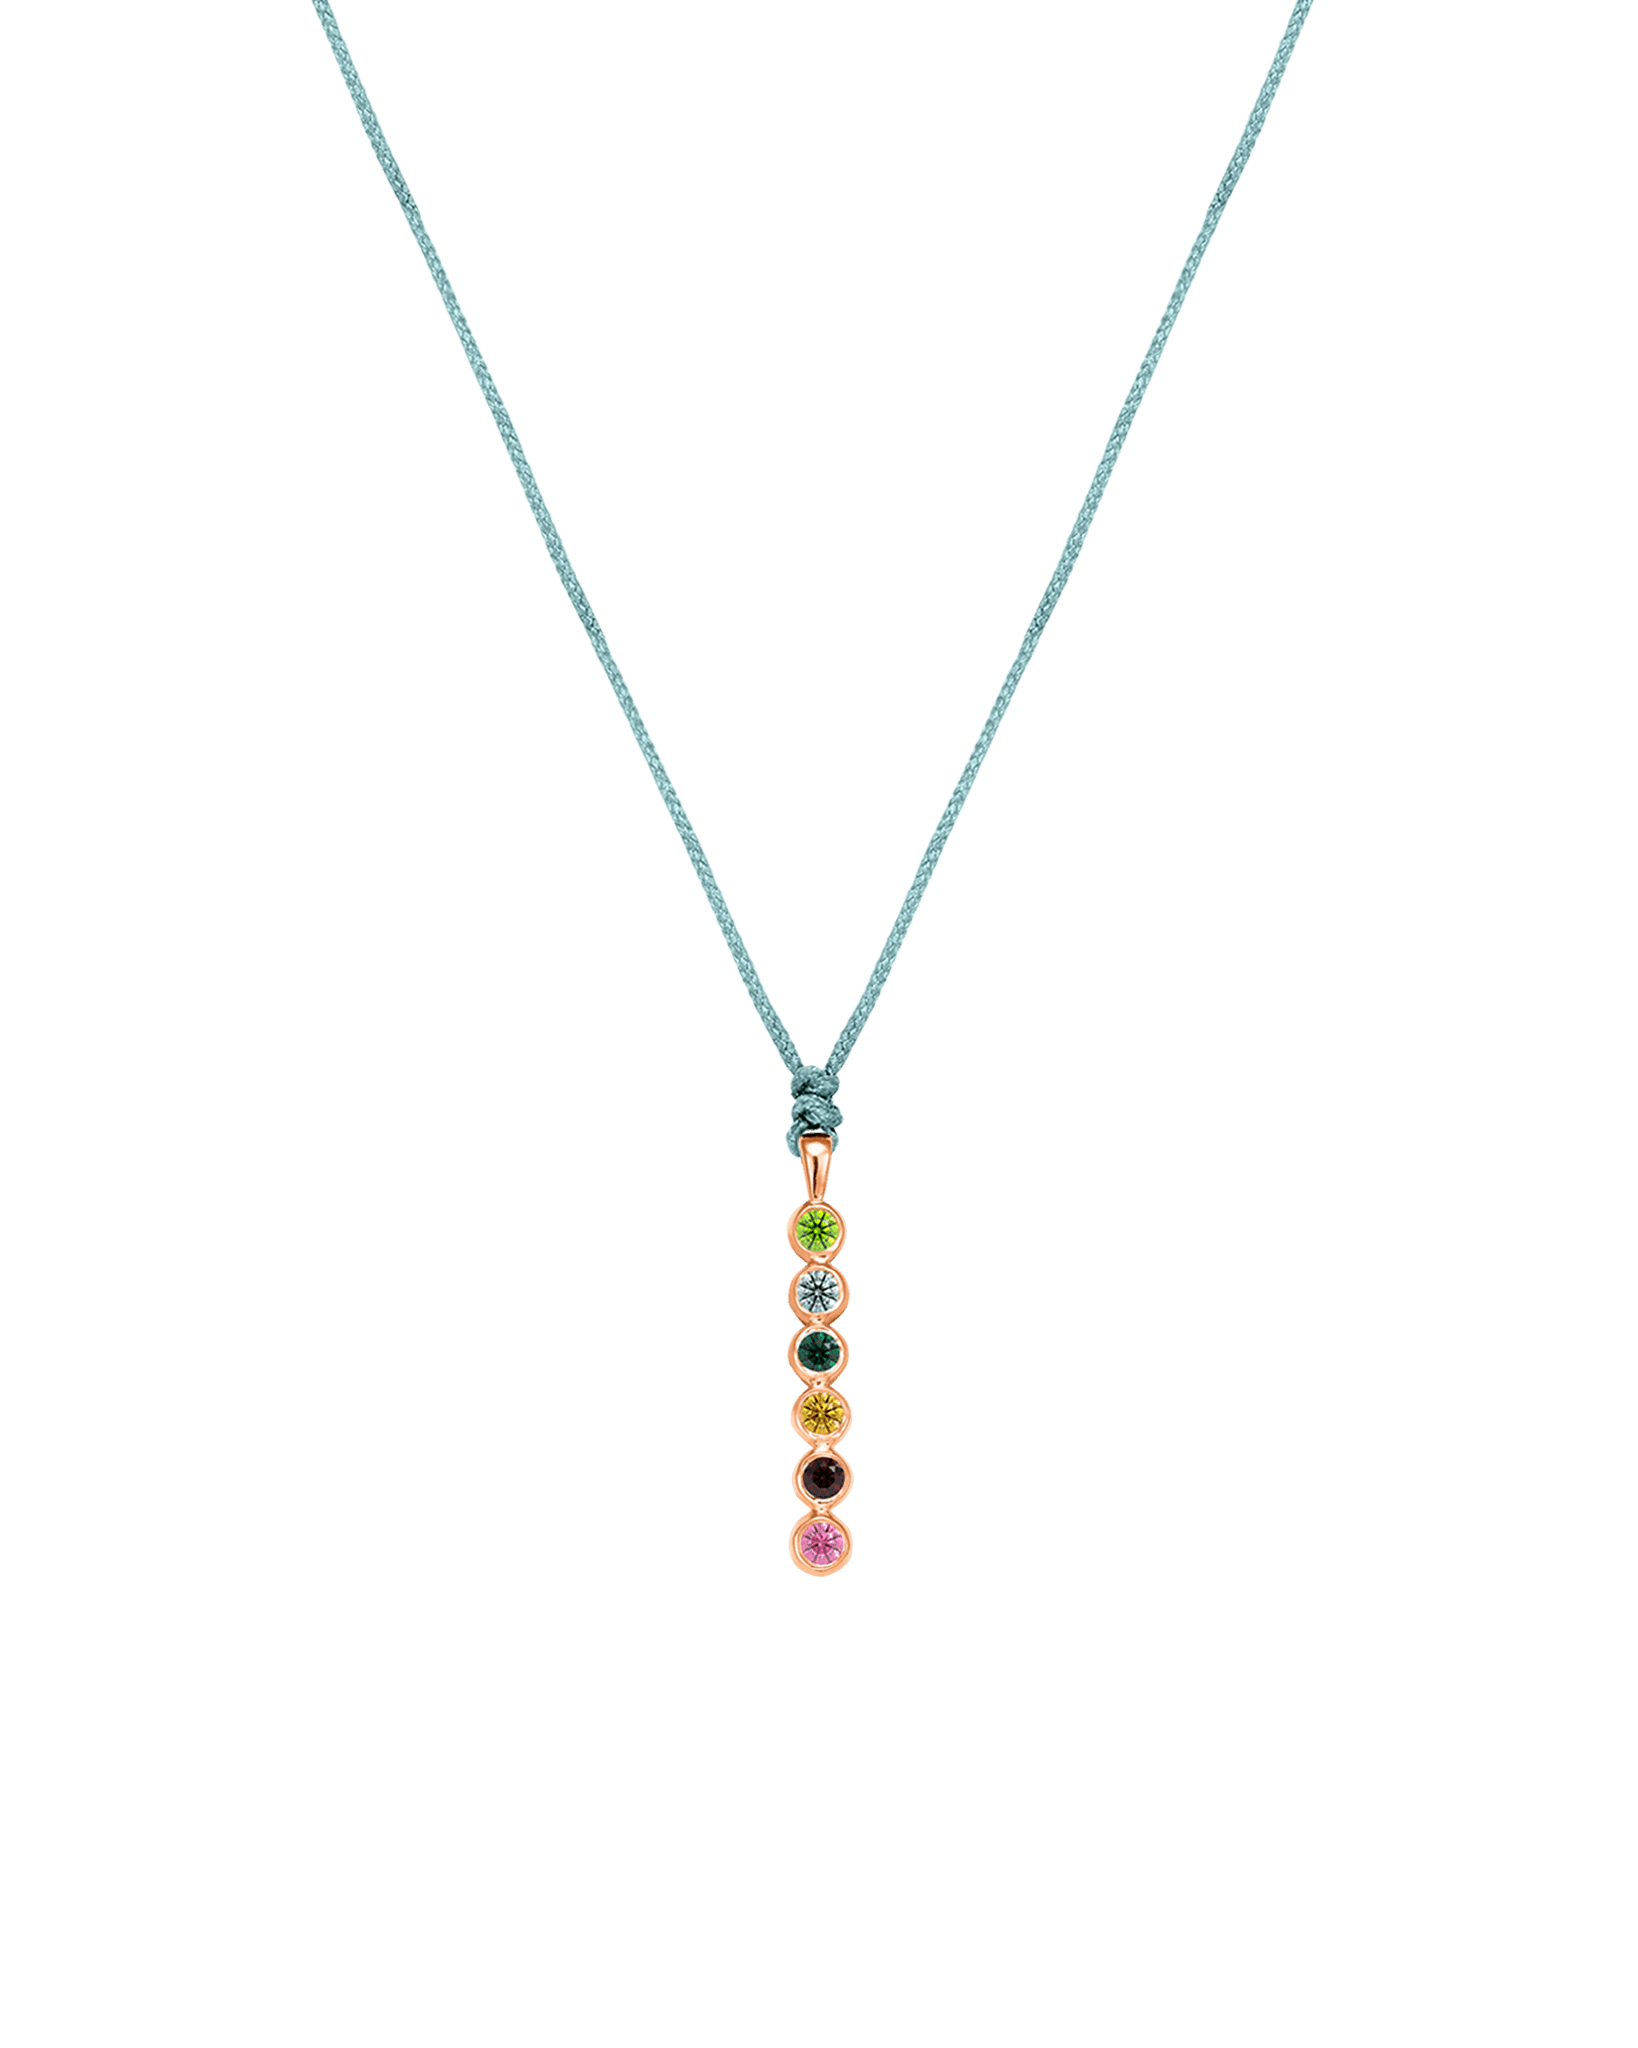 The Birthstones Bar Necklace - 14K Rose Gold Necklaces 14K Solid Gold Turquoise 2 